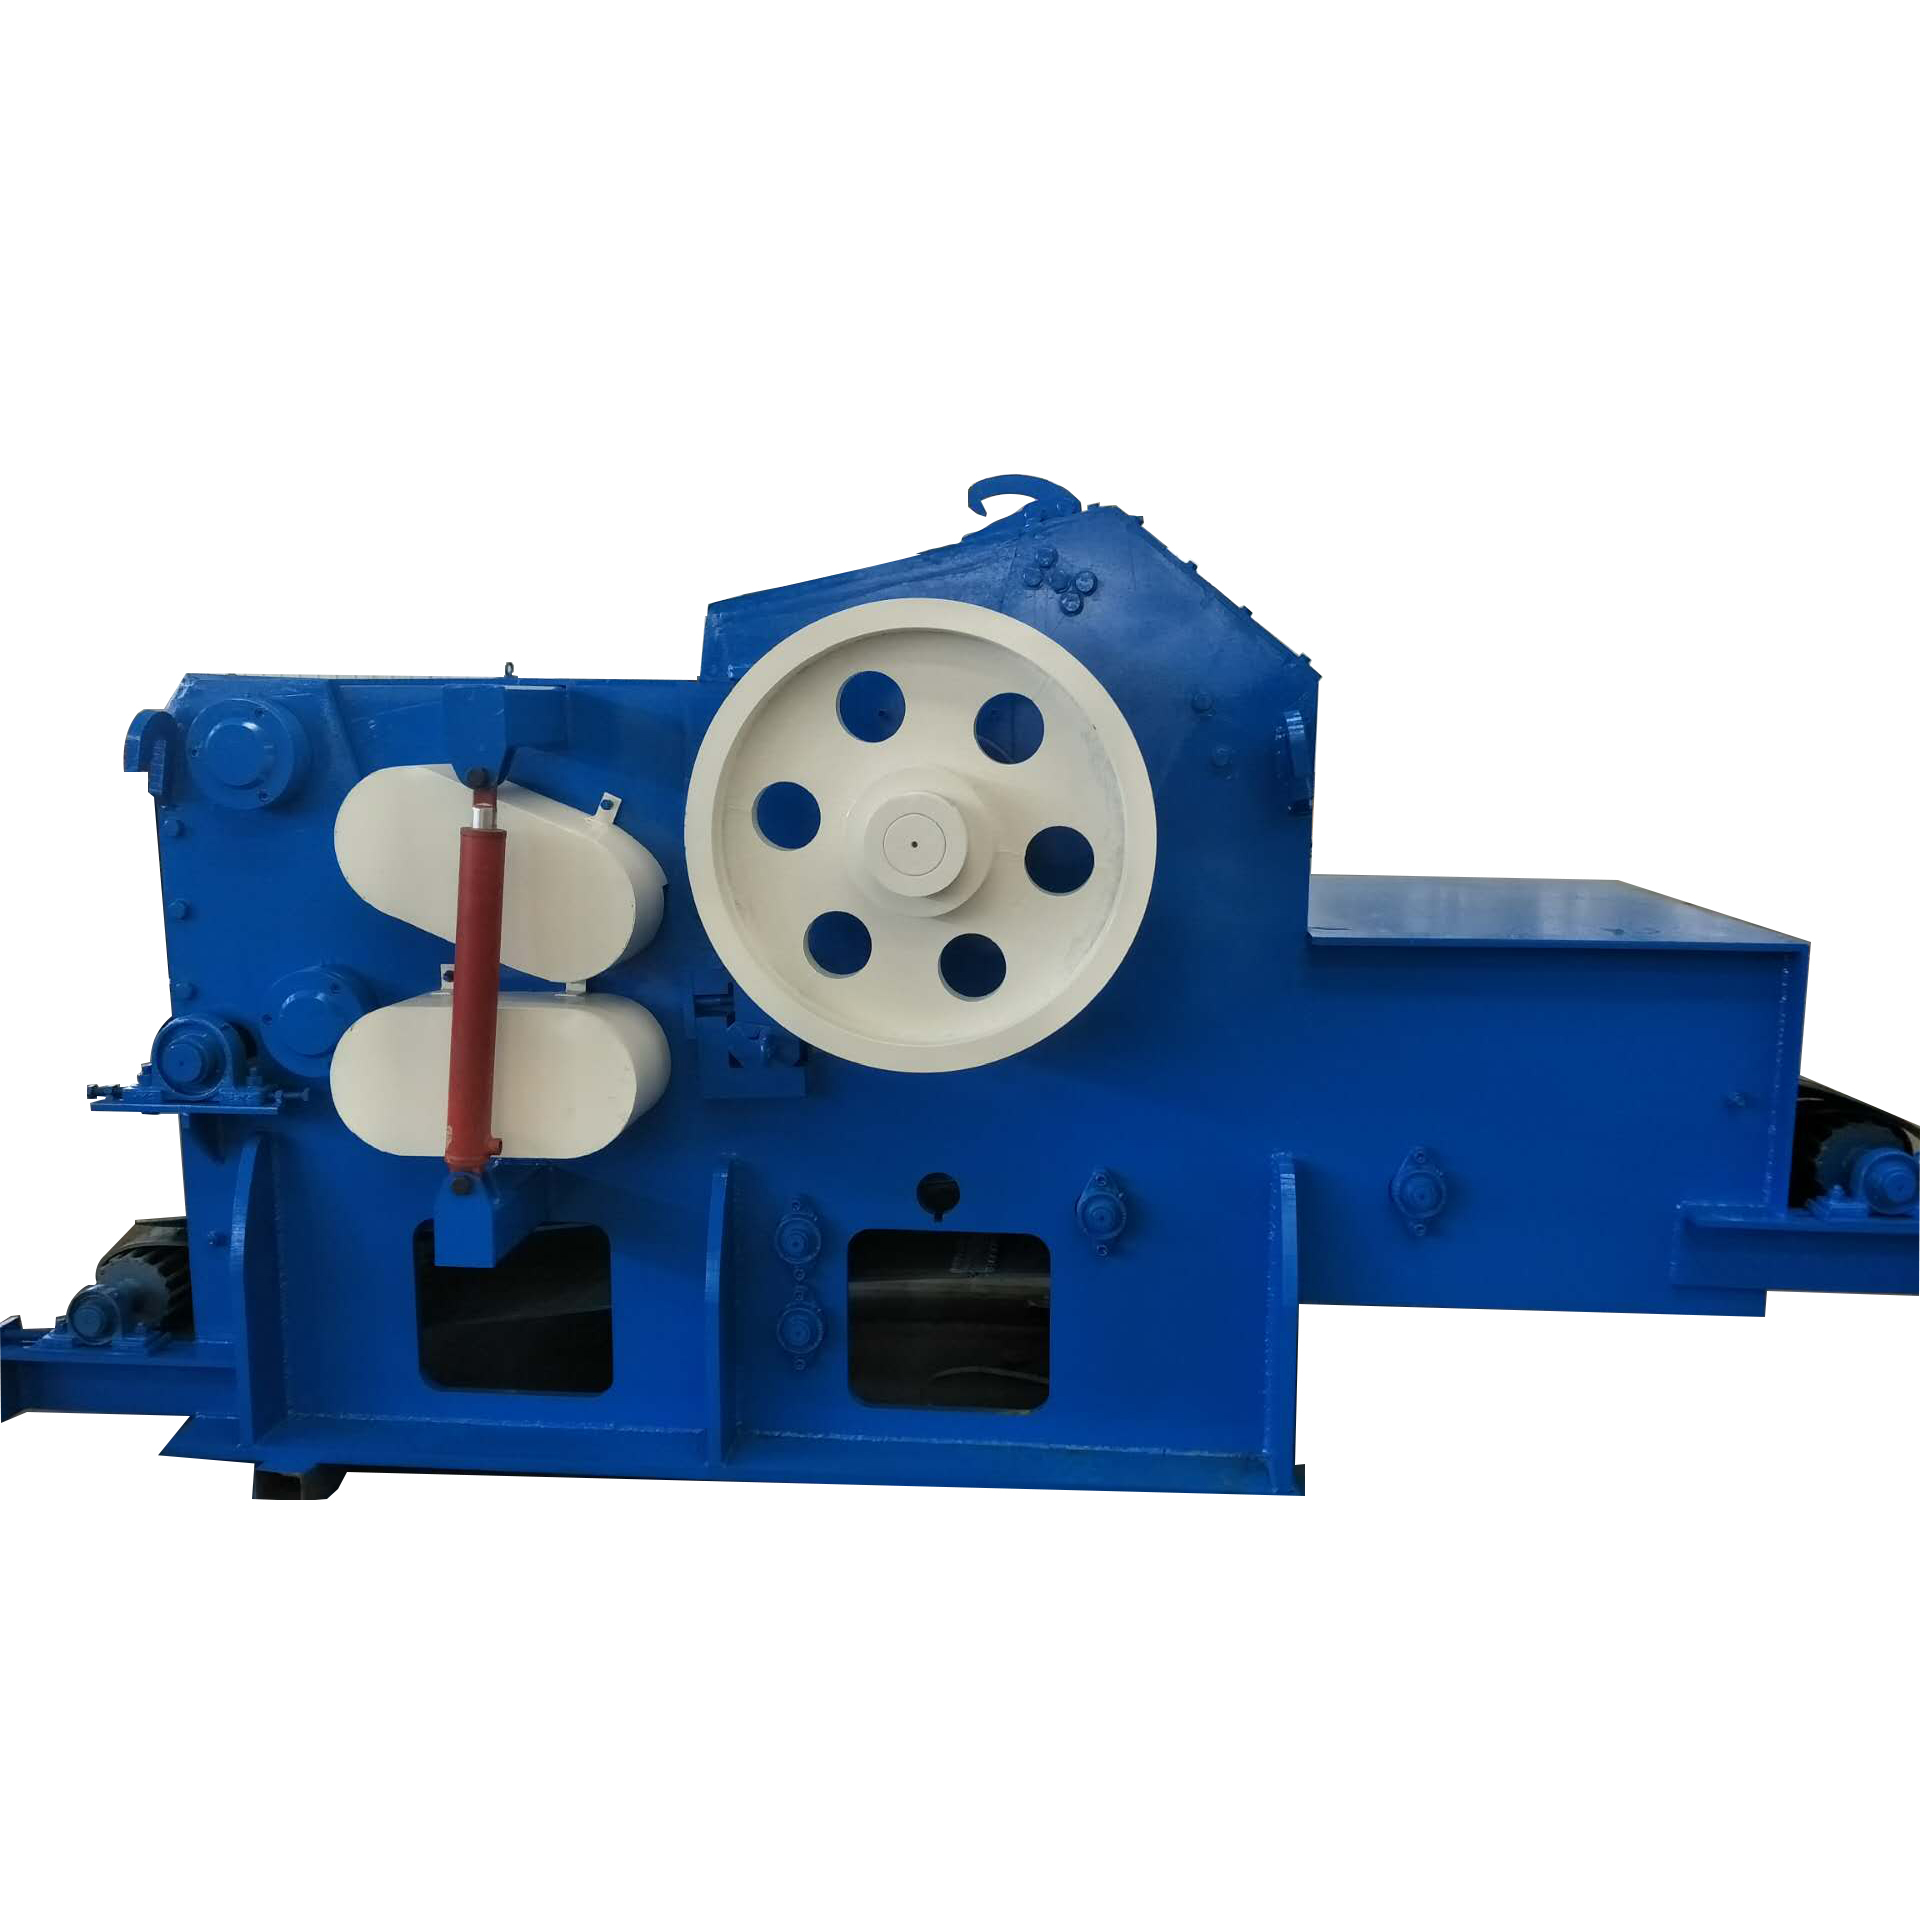 Factory Price Industrial Drum Wood Chipper Shredder Machine For Sale Featured Image